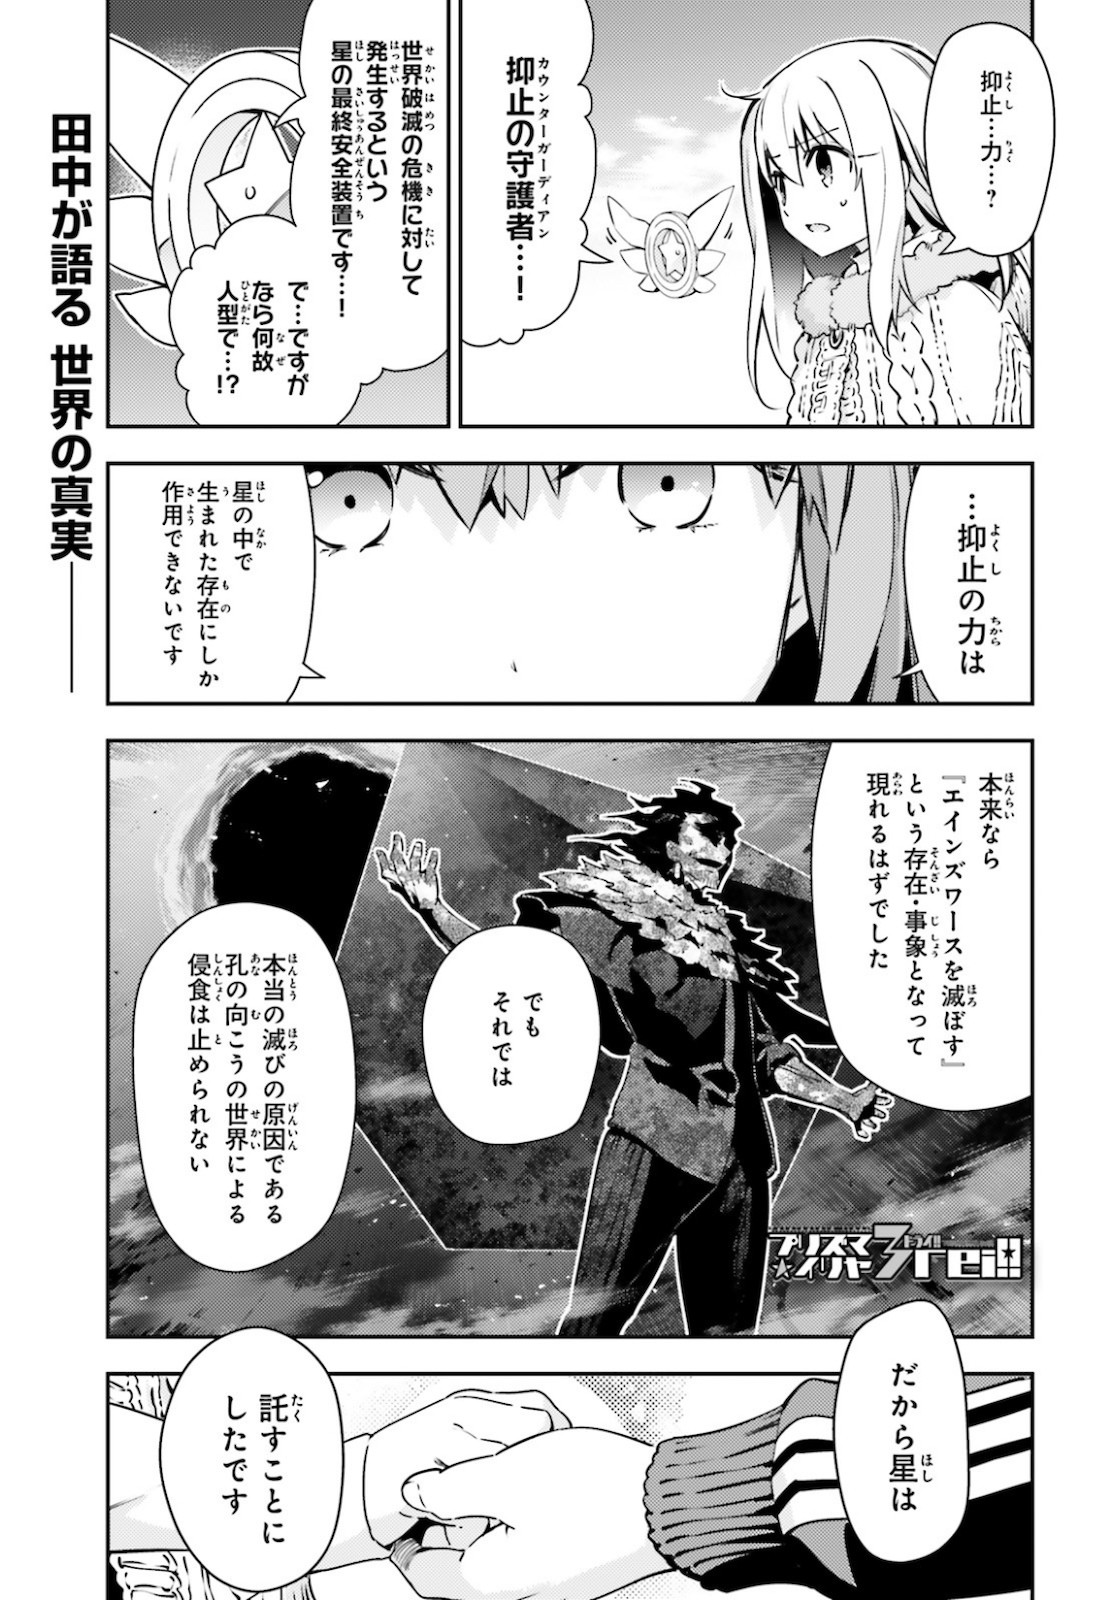 Fate-Apocrypha - Chapter 48 - Page 40